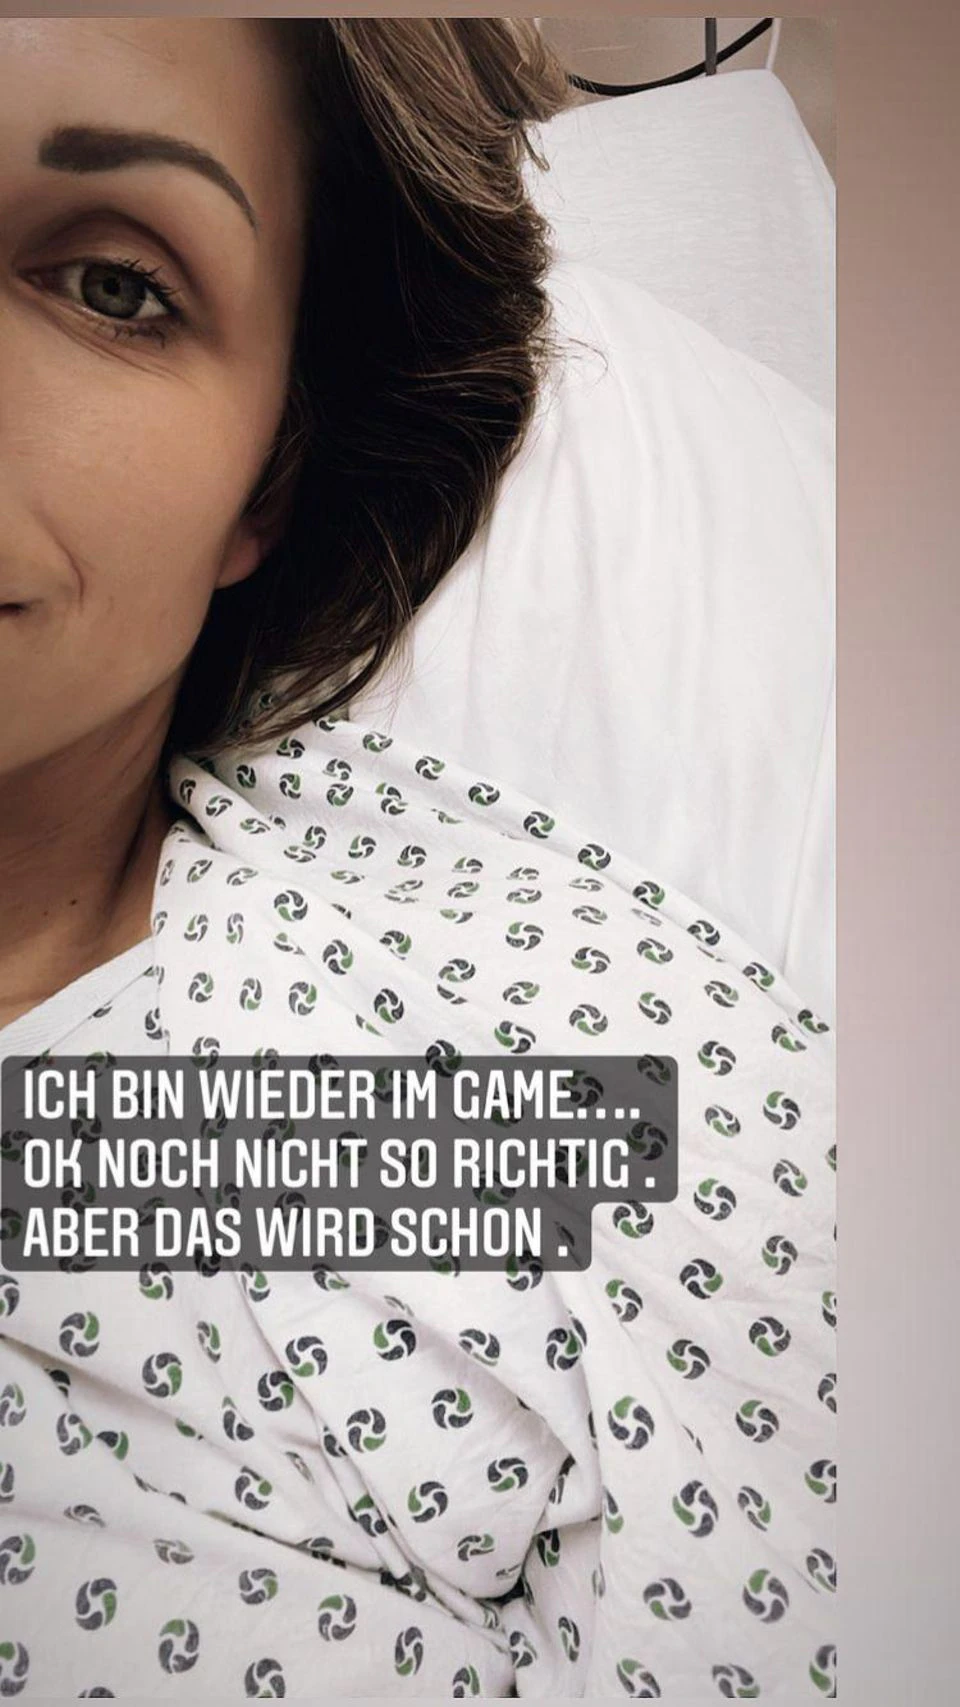 Anna-Maria Zimmermann: She reports from the hospital